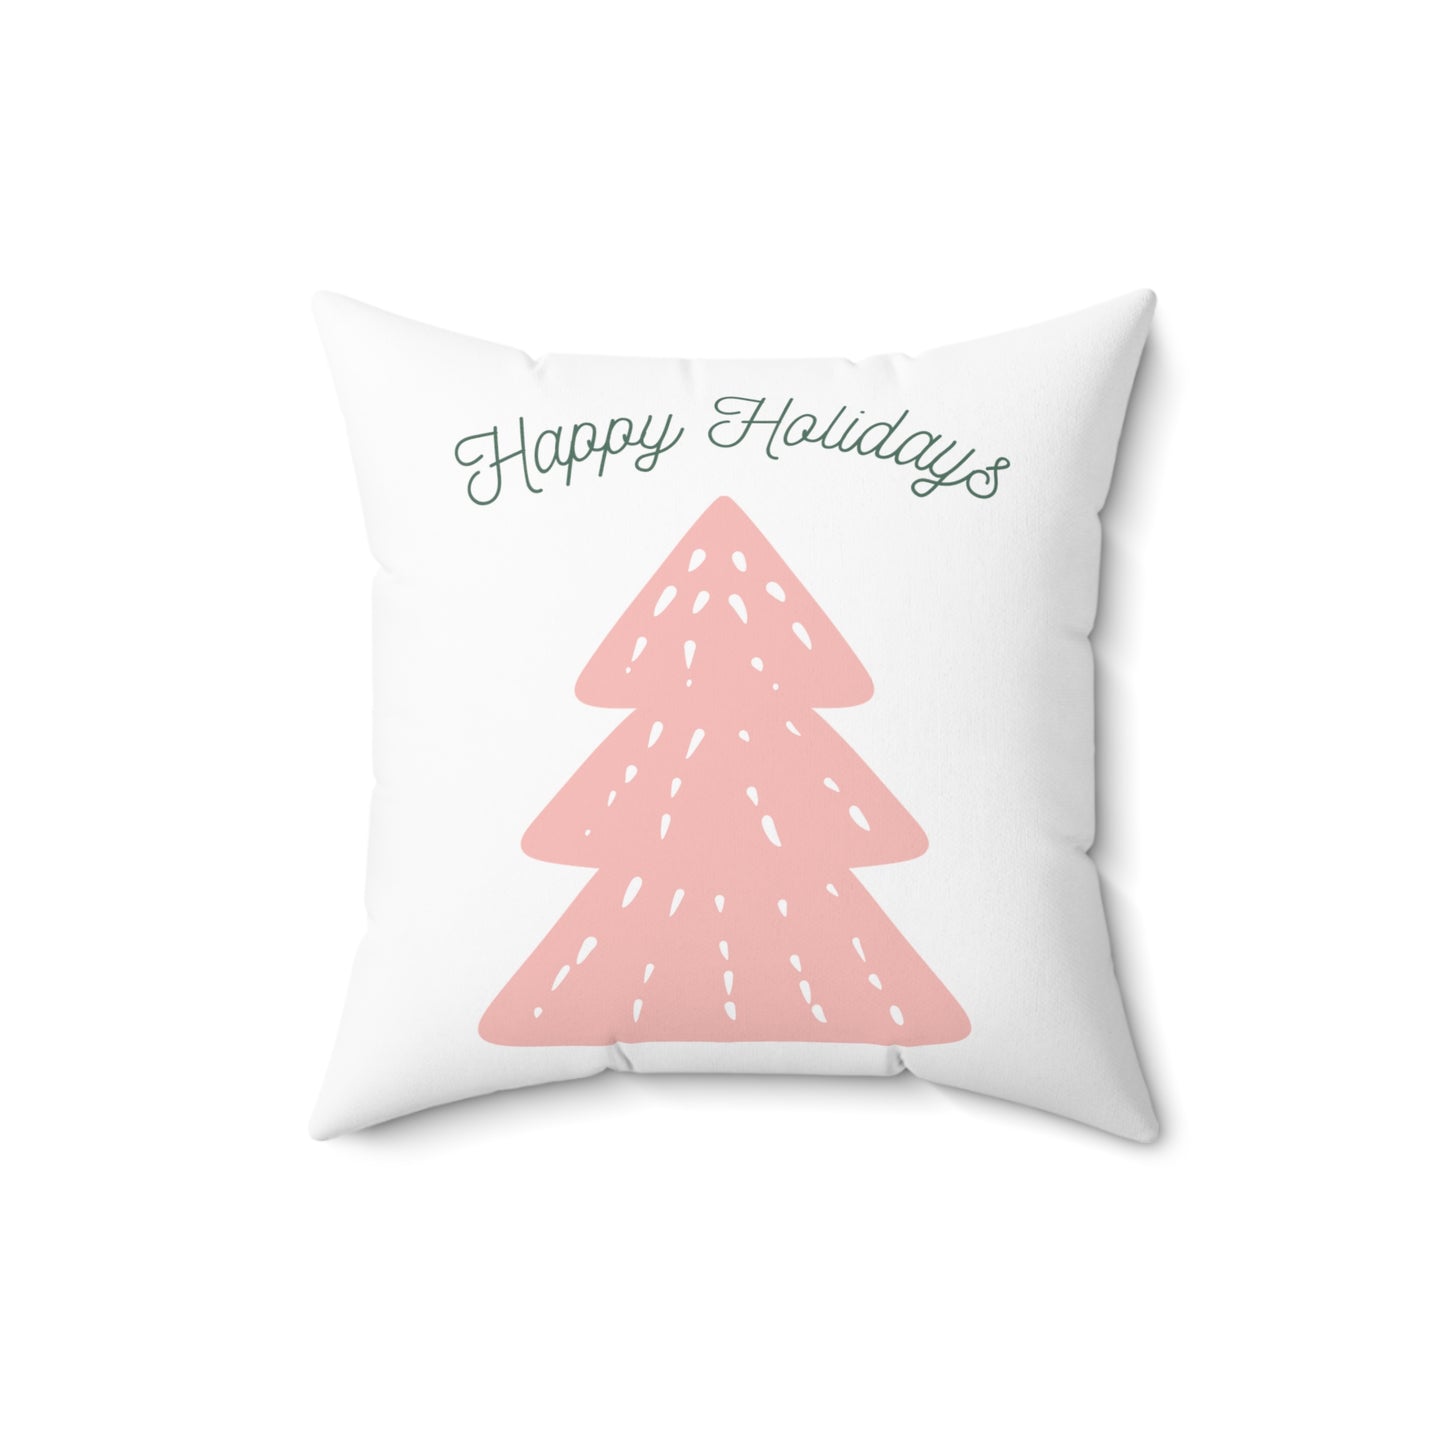 Happy Holidays Printed Polyester Sqaure Pillow, White